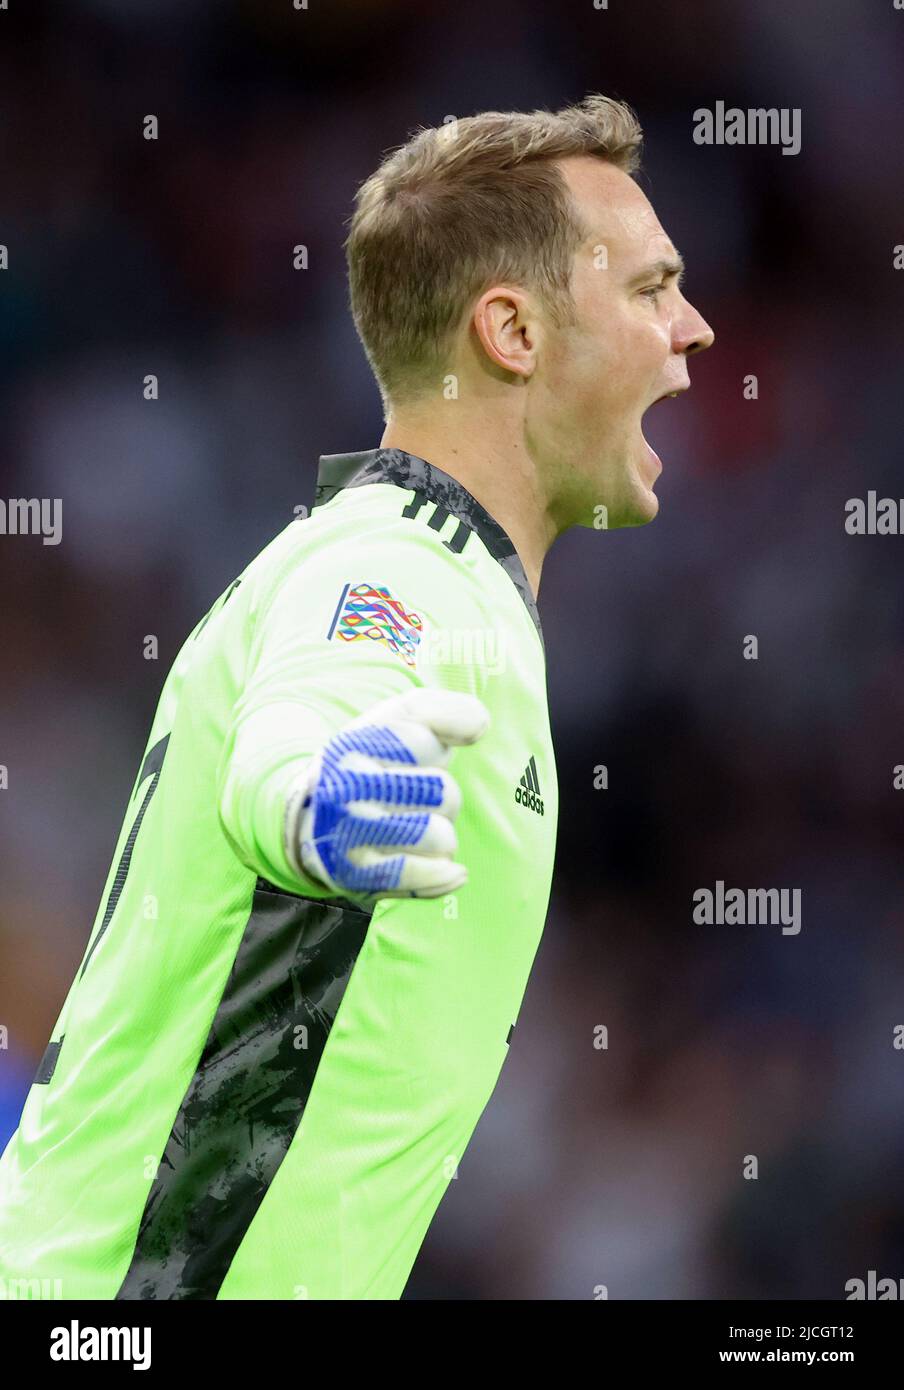 Manuel Neuer of Germany  MUNICH, GERMANY - JUNE 07:  UEFA Nations League League A Group 3 match between Germany and England at Allianz Arena on June 07, 2022 in Munich, Germany. Nations League Deutschland England  © diebilderwelt / Alamy Stock Stock Photo